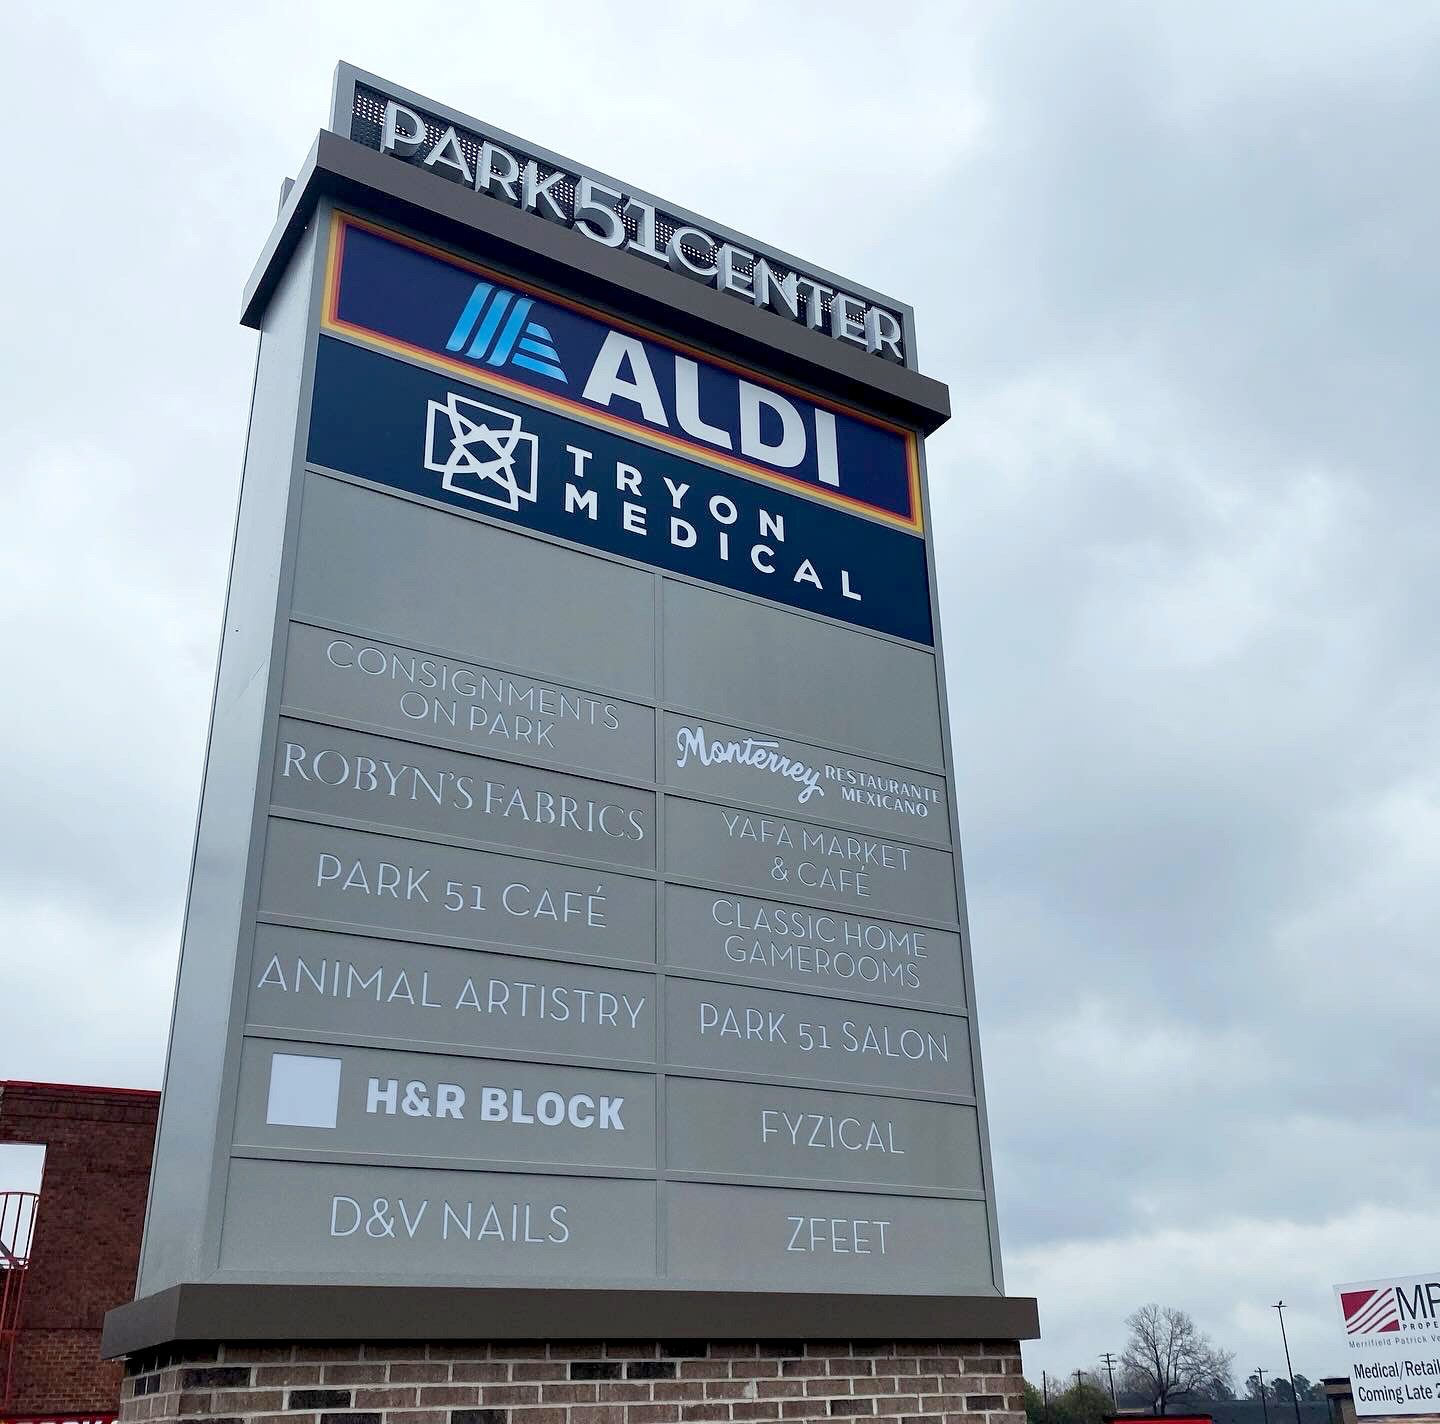 pylon sign for Park 51 Center with Aldi and Tryon Medical Partners in top two positions on sign